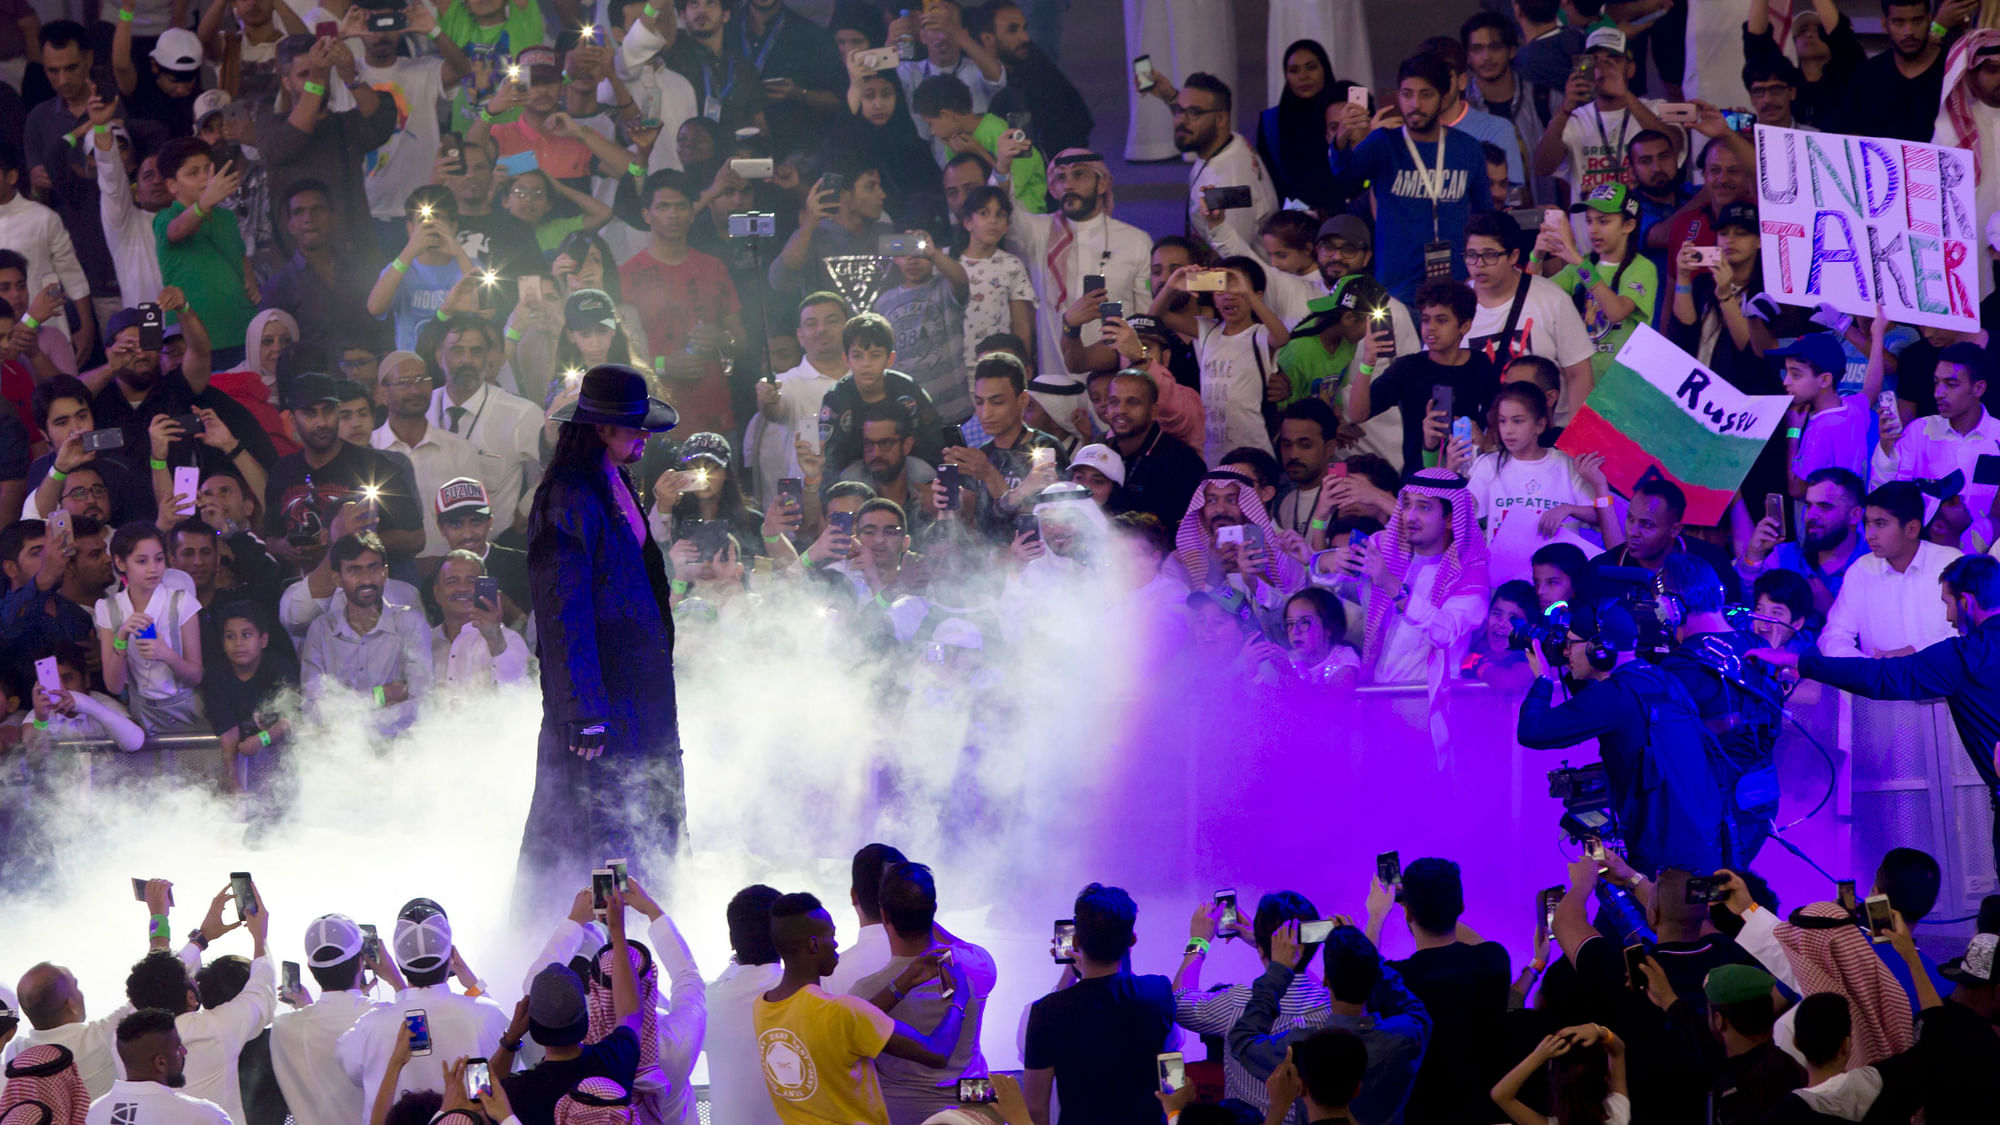 Does The Undertaker still need to be involved in the never-ending soap opera known as sports entertainment?